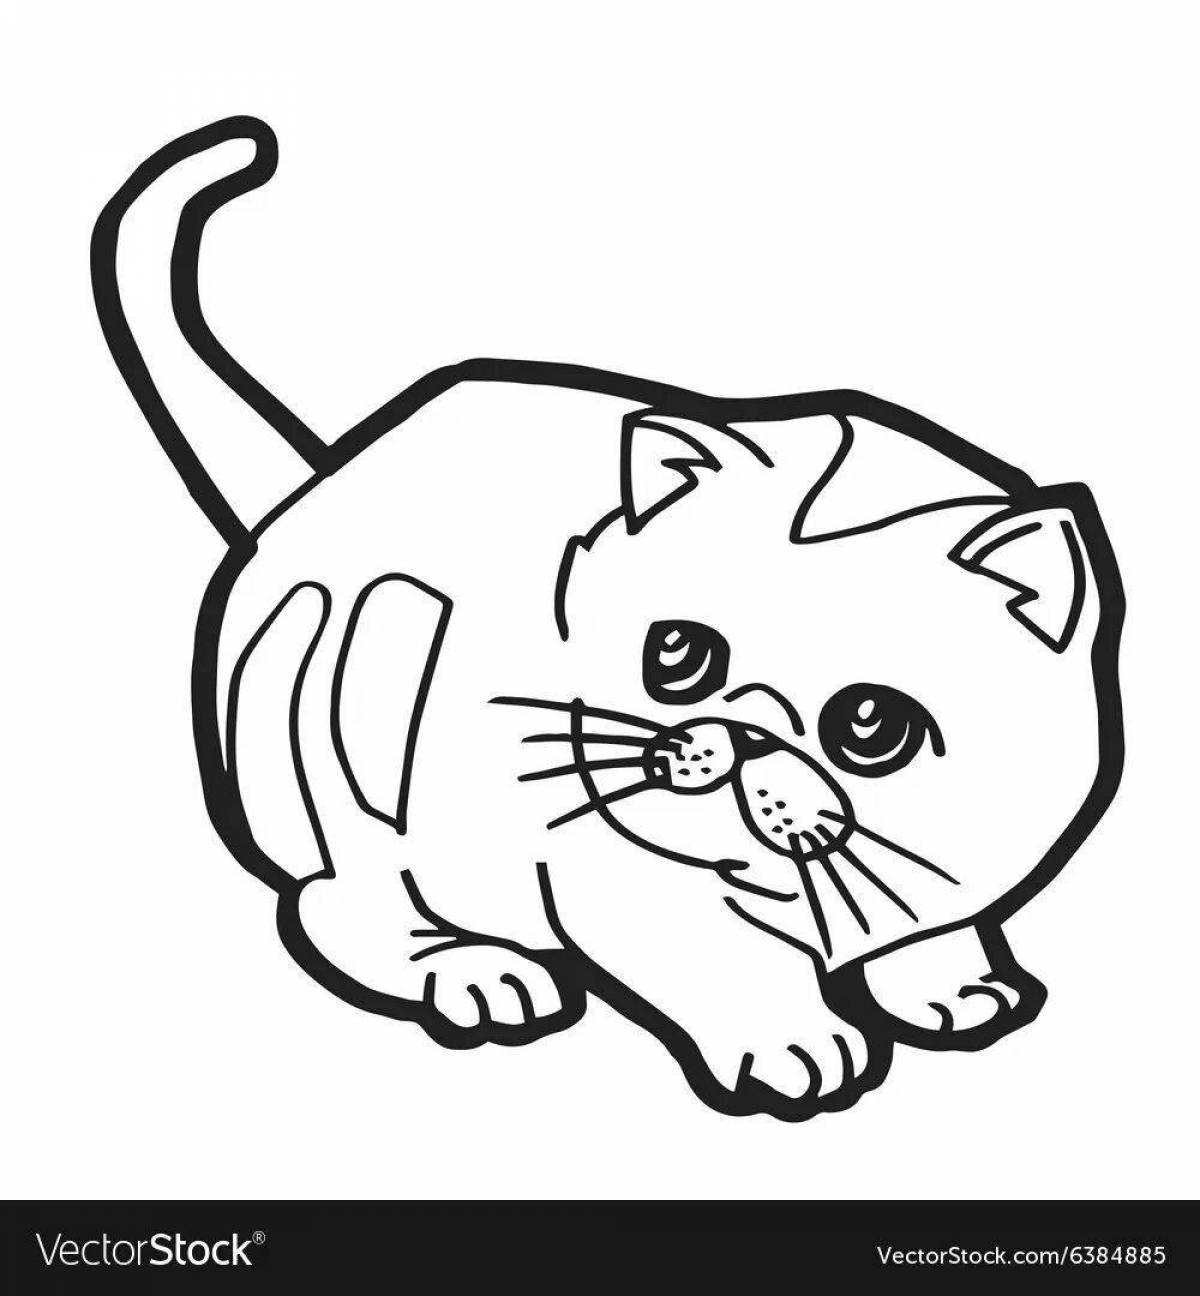 Coloring page charming fold cat